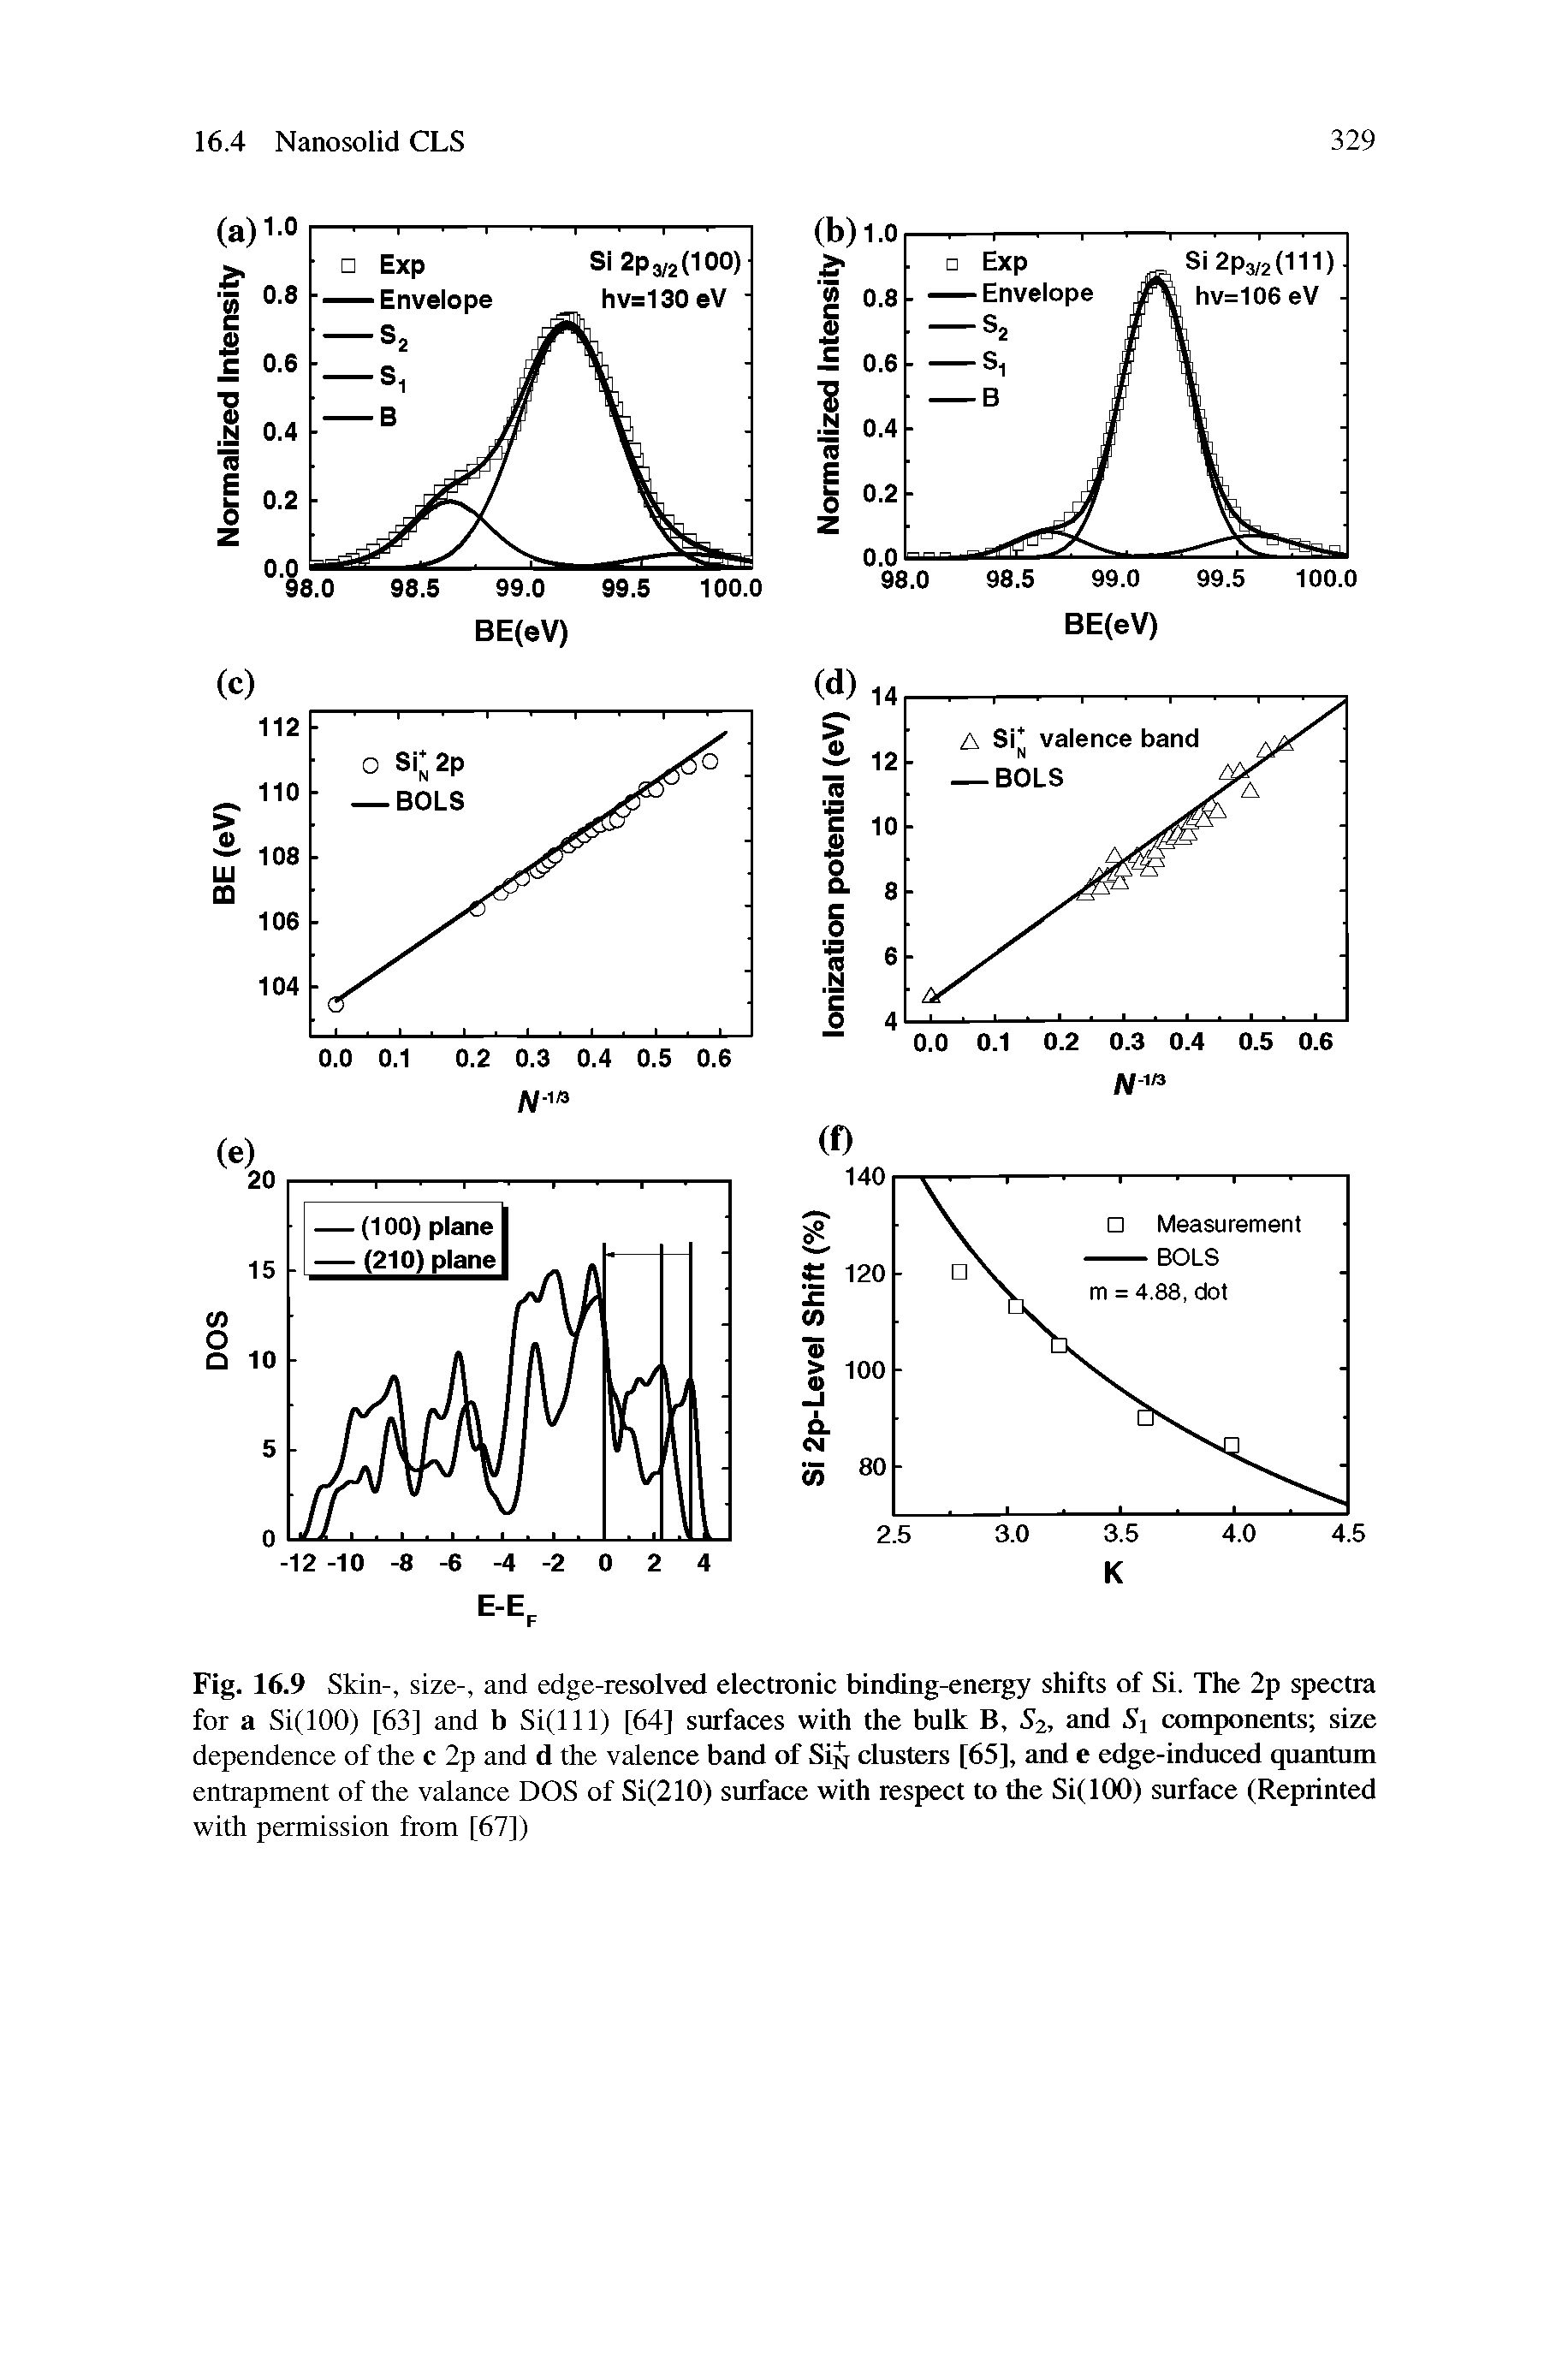 Fig. 16.9 Skin-, size-, and edge-resolved electronic binding-energy shifts of Si. The 2p spectra for a Si(lOO) [63] and b Si(lll) [64] surfaces with the bulk B, S2, and 5i components size dependence of the c 2p and d the valence band of Si clusters [65], and e edge-induced quantum entrapment of the valance DOS of Si(210) surface with respect to the Si(lOO) surface (Reprinted...